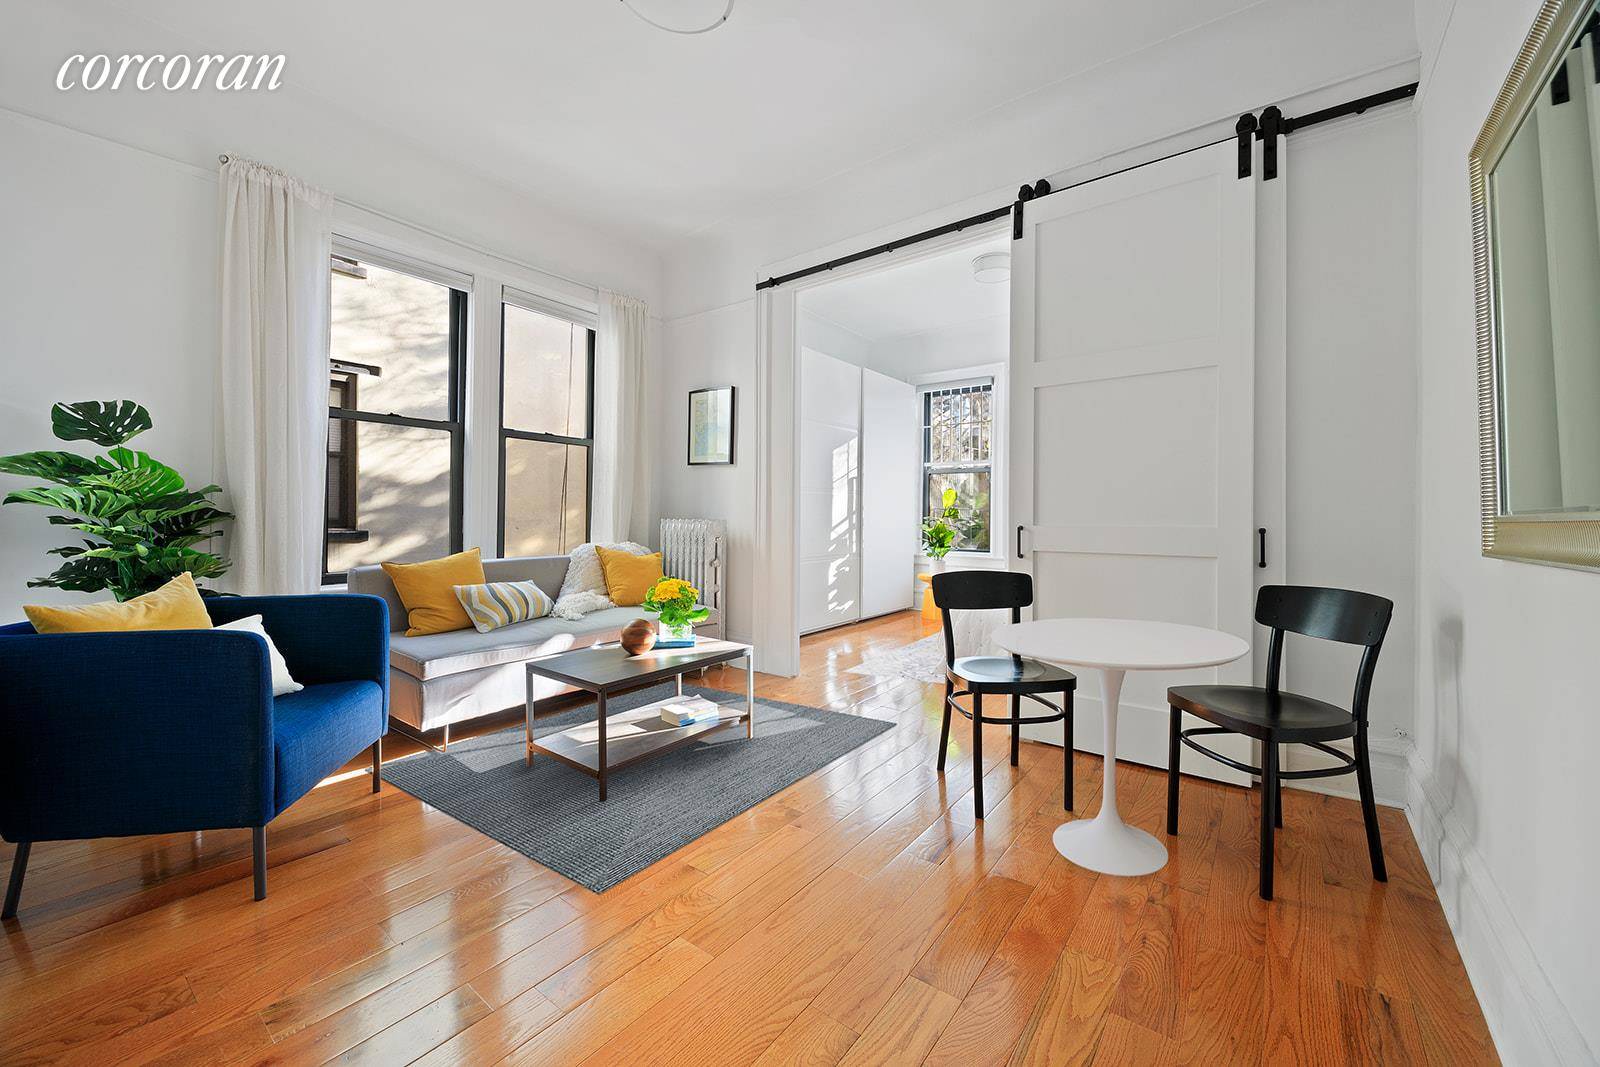 Bright and quiet, this renovated pre war two bedroom coop is only one flight up and one block from Prospect Park.